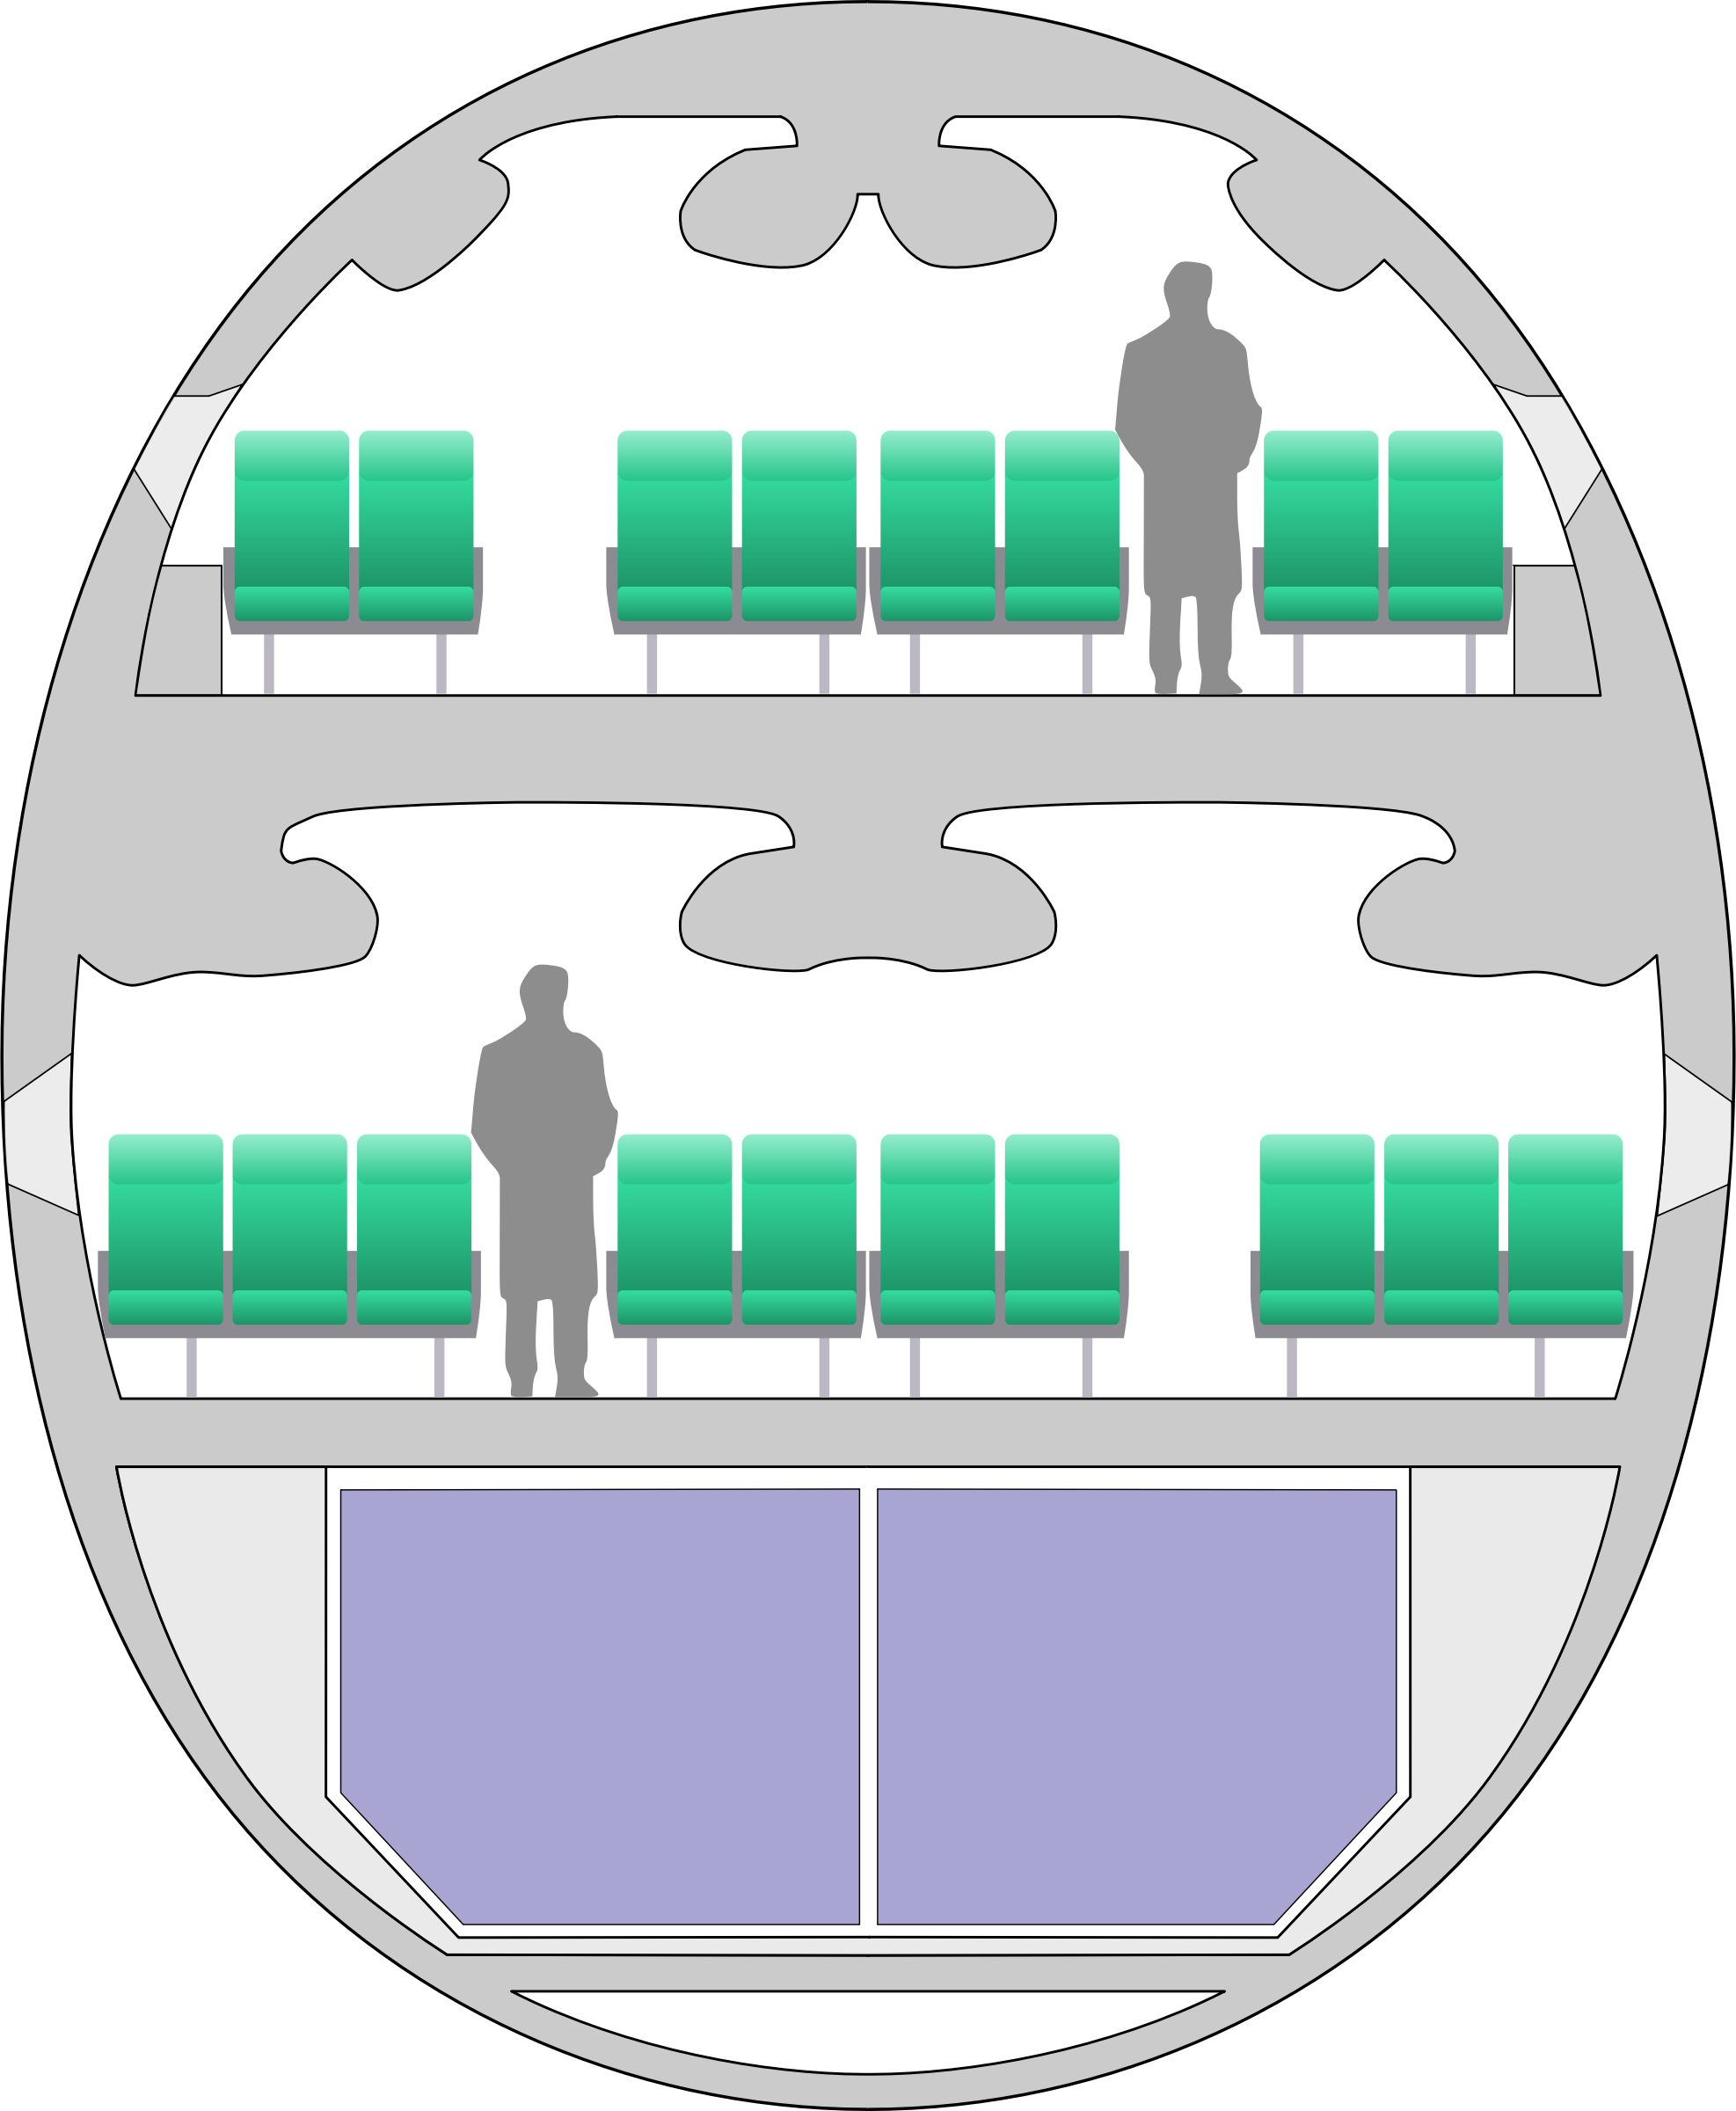 Airbus A380 Cross Section SVG Clip arts